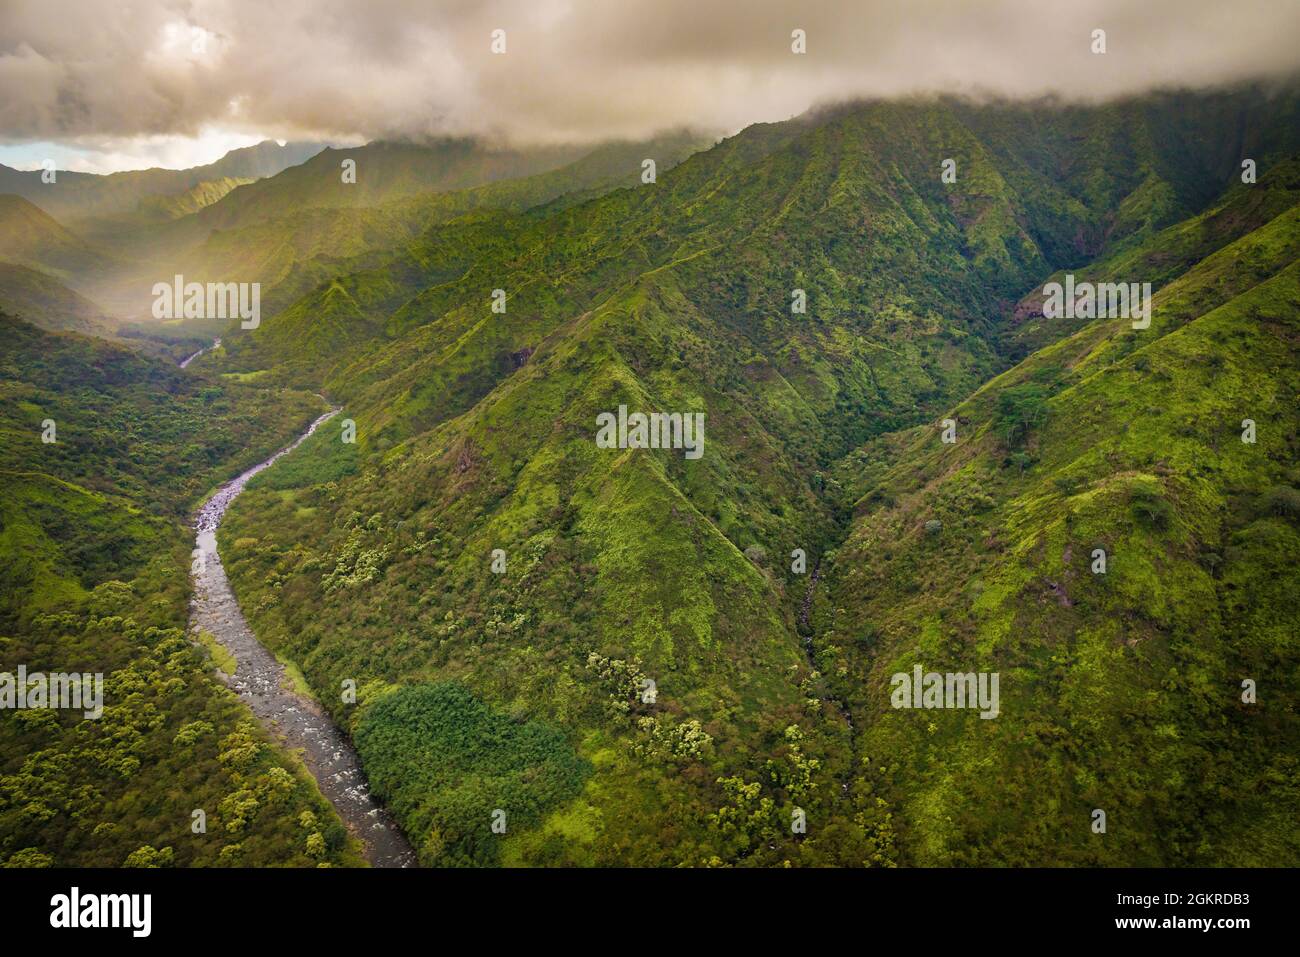 The mountainous Hanalei River Valley on Kauai's north shore photographed from above, Kauai, Hawaii, United States of America, Pacific Stock Photo